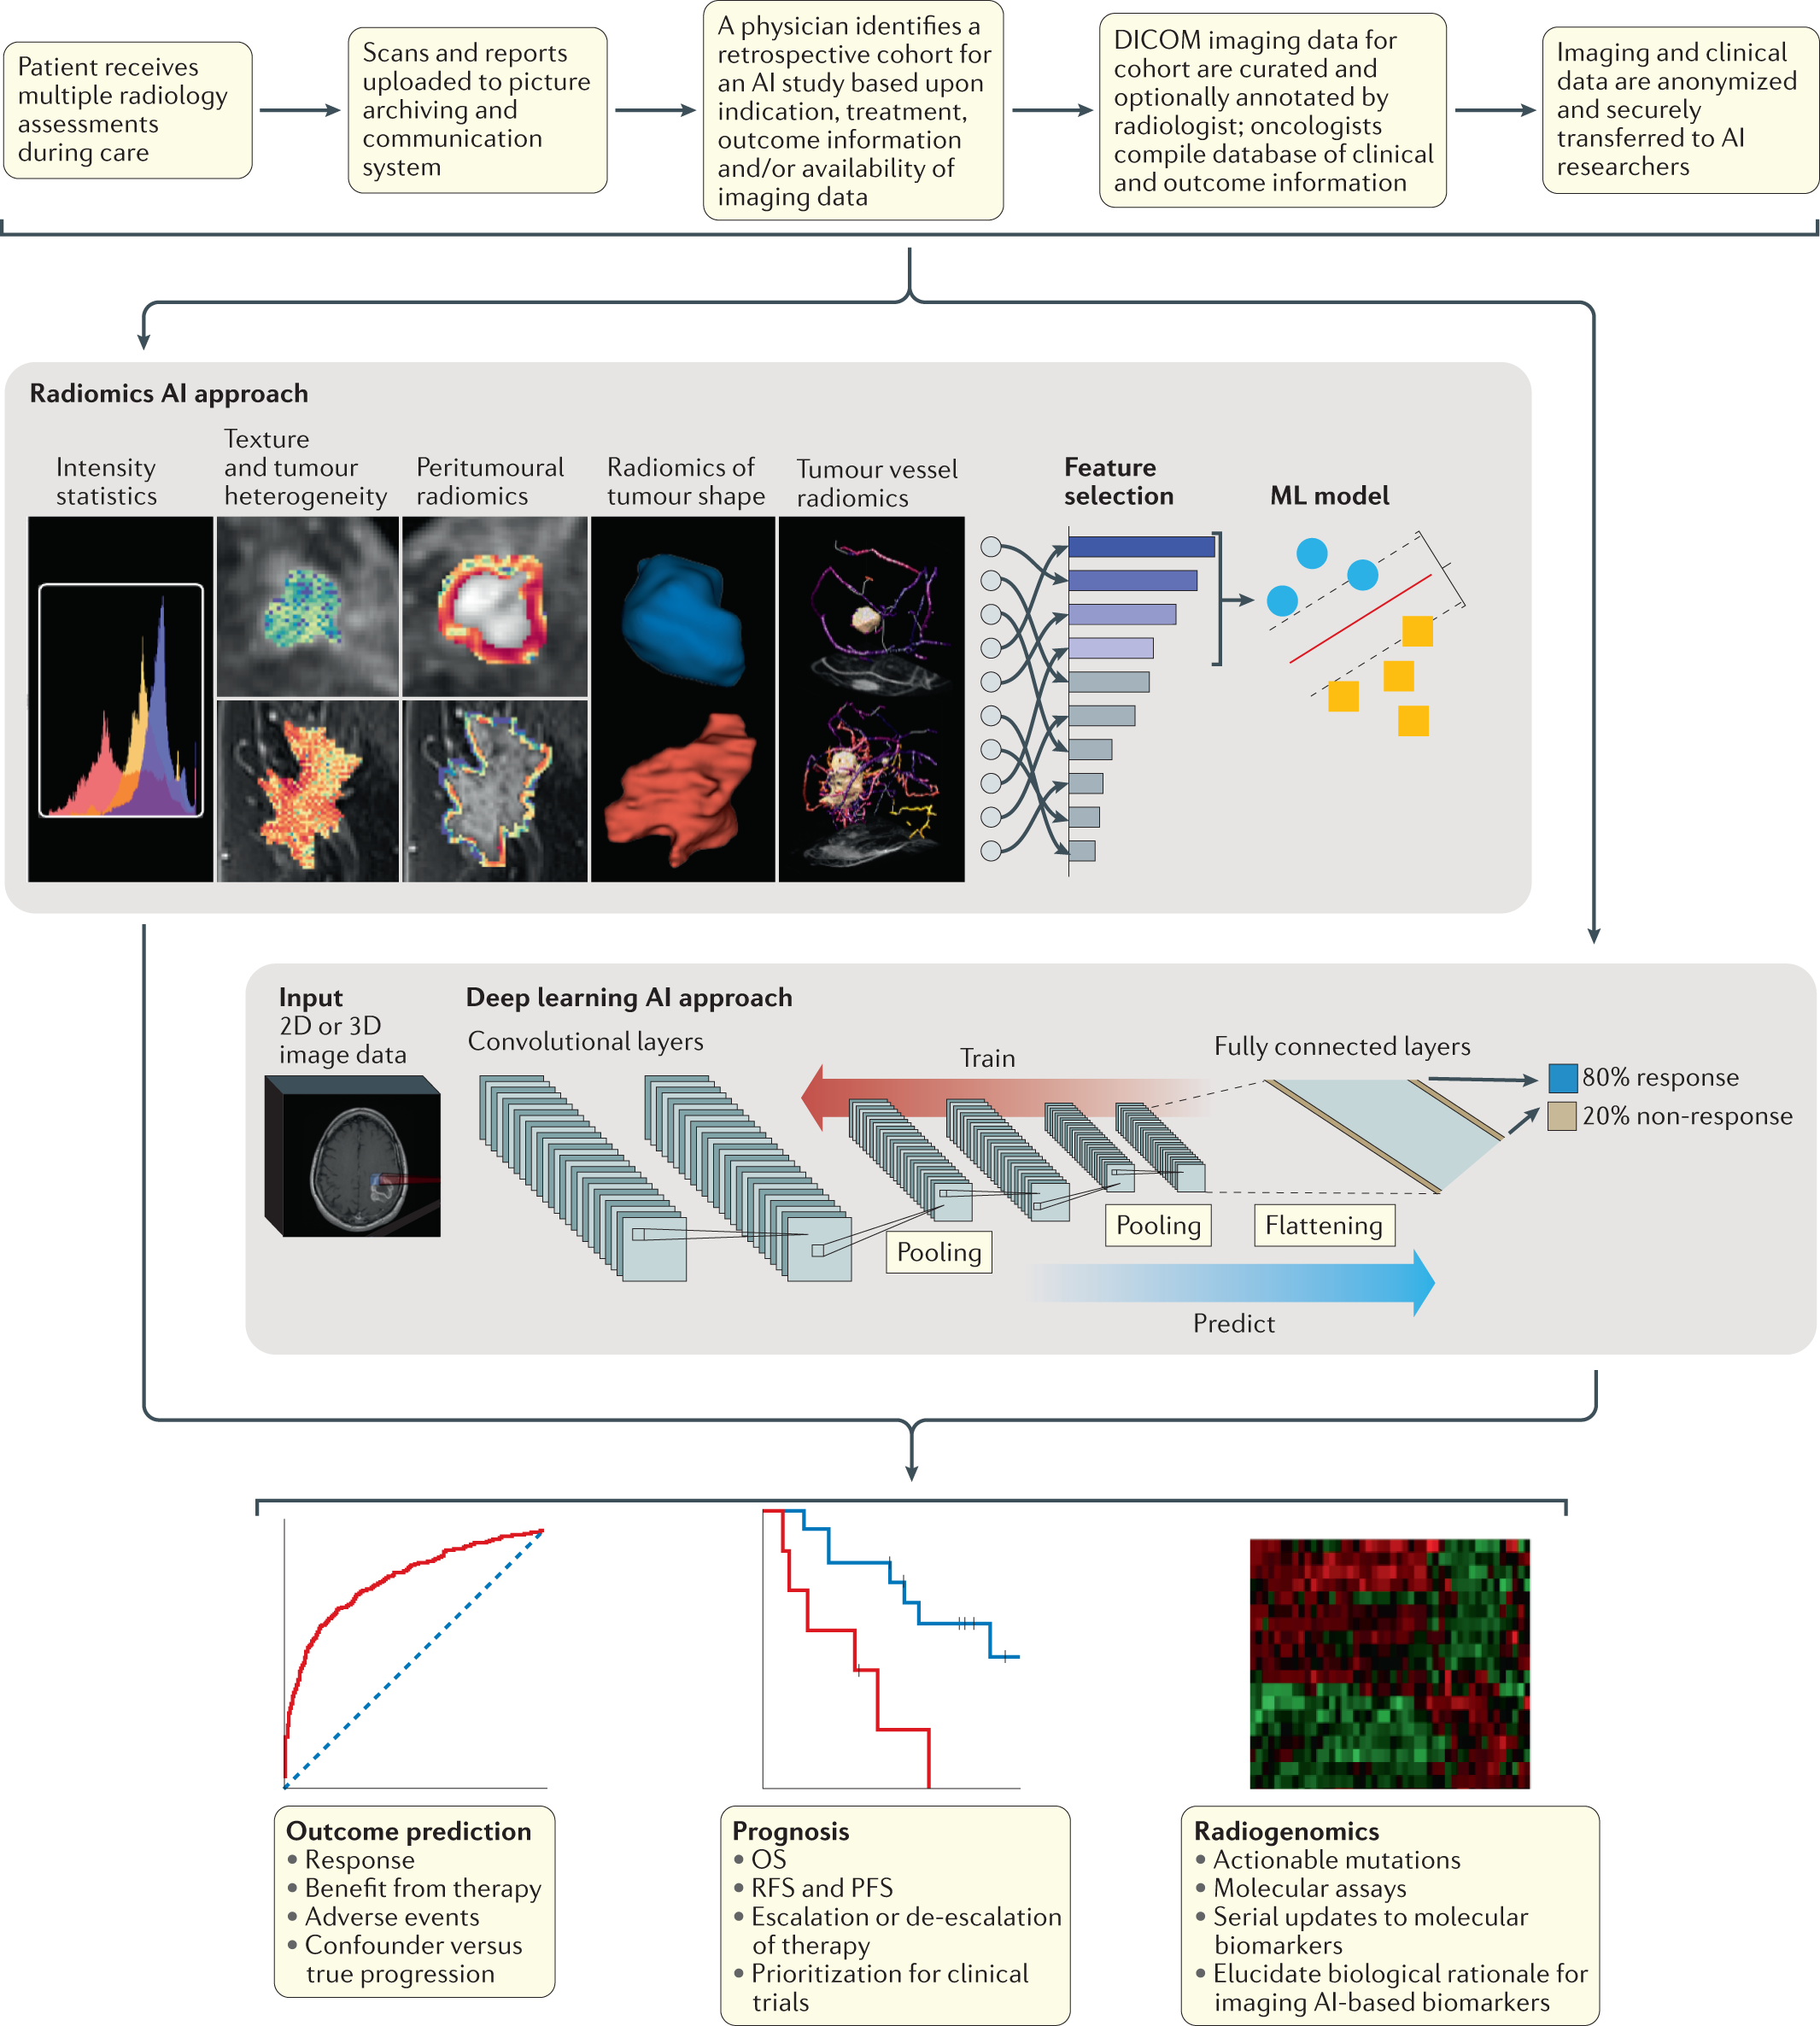 Predicting cancer outcomes with radiomics and artificial intelligence in  radiology | Nature Reviews Clinical Oncology